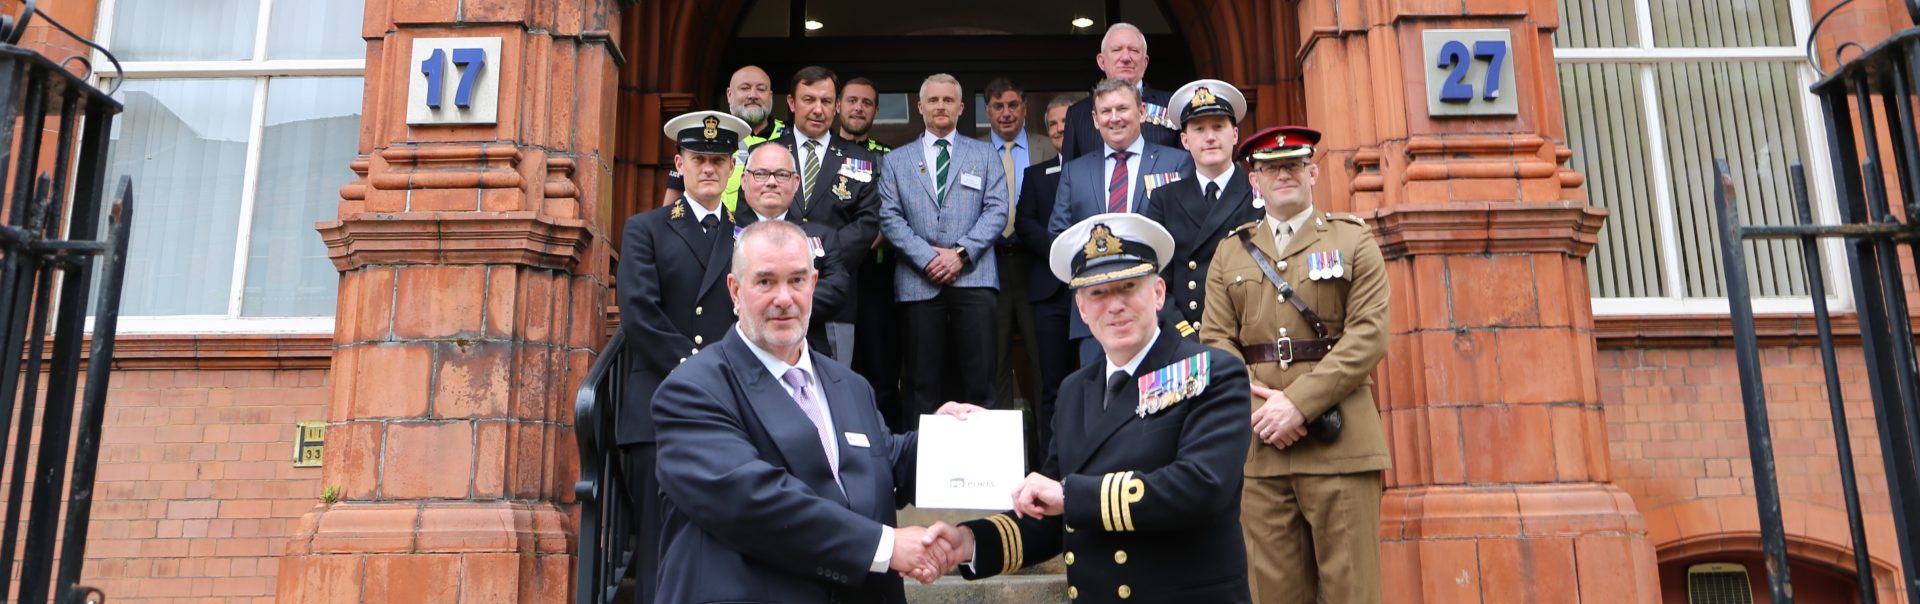 PD Ports strengthens long-serving support for the armed forces community